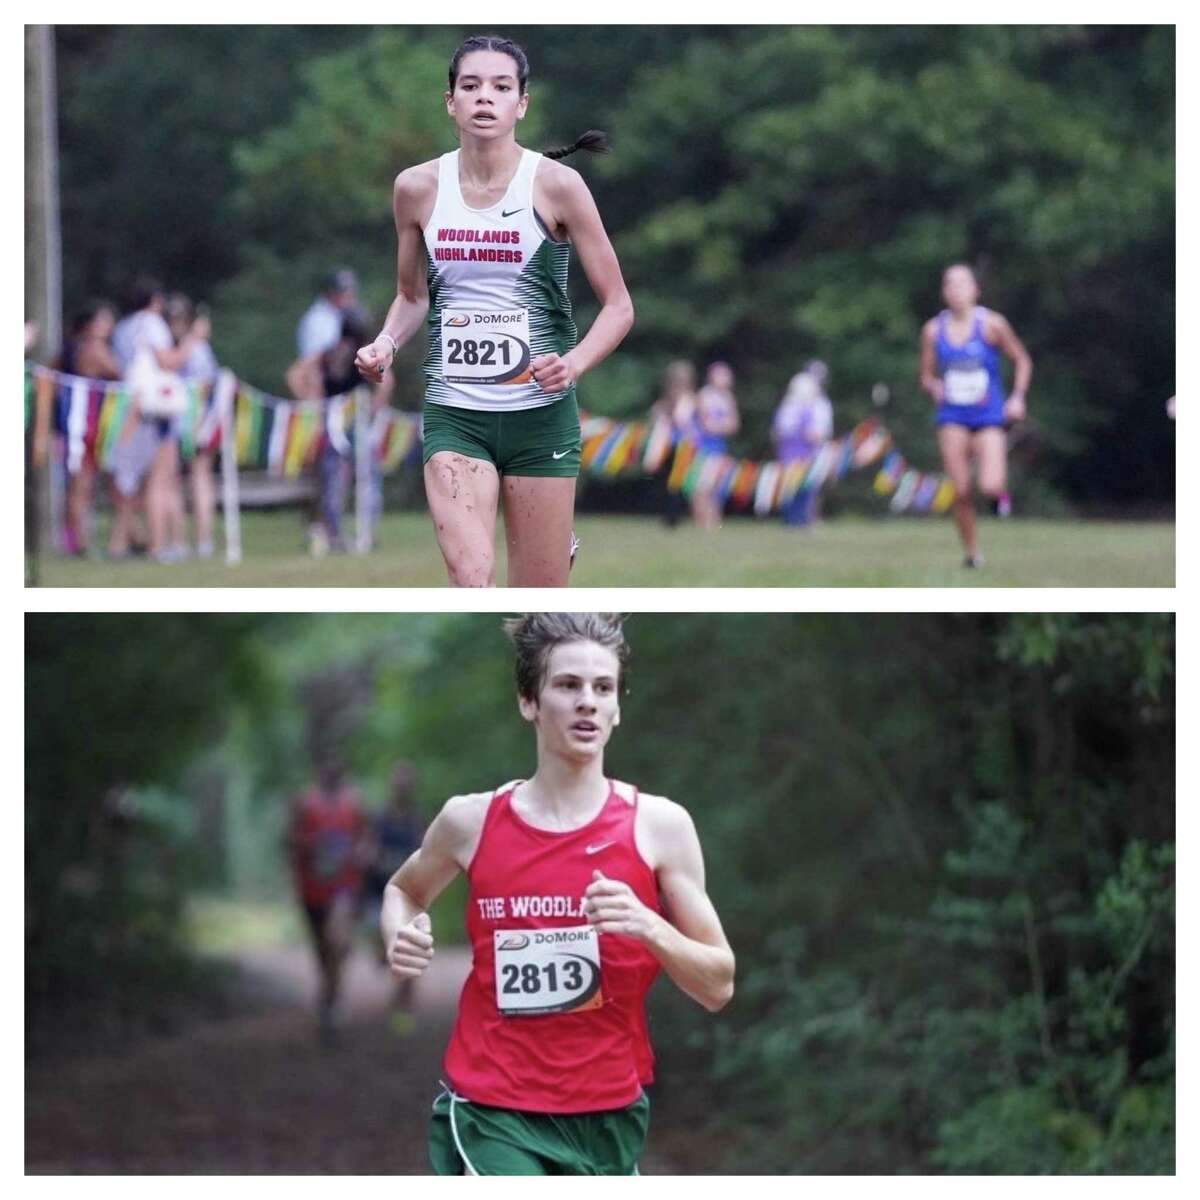 The Woodlands cross country runners Penelope Gracey (top) and Kyle Easton (bottom).